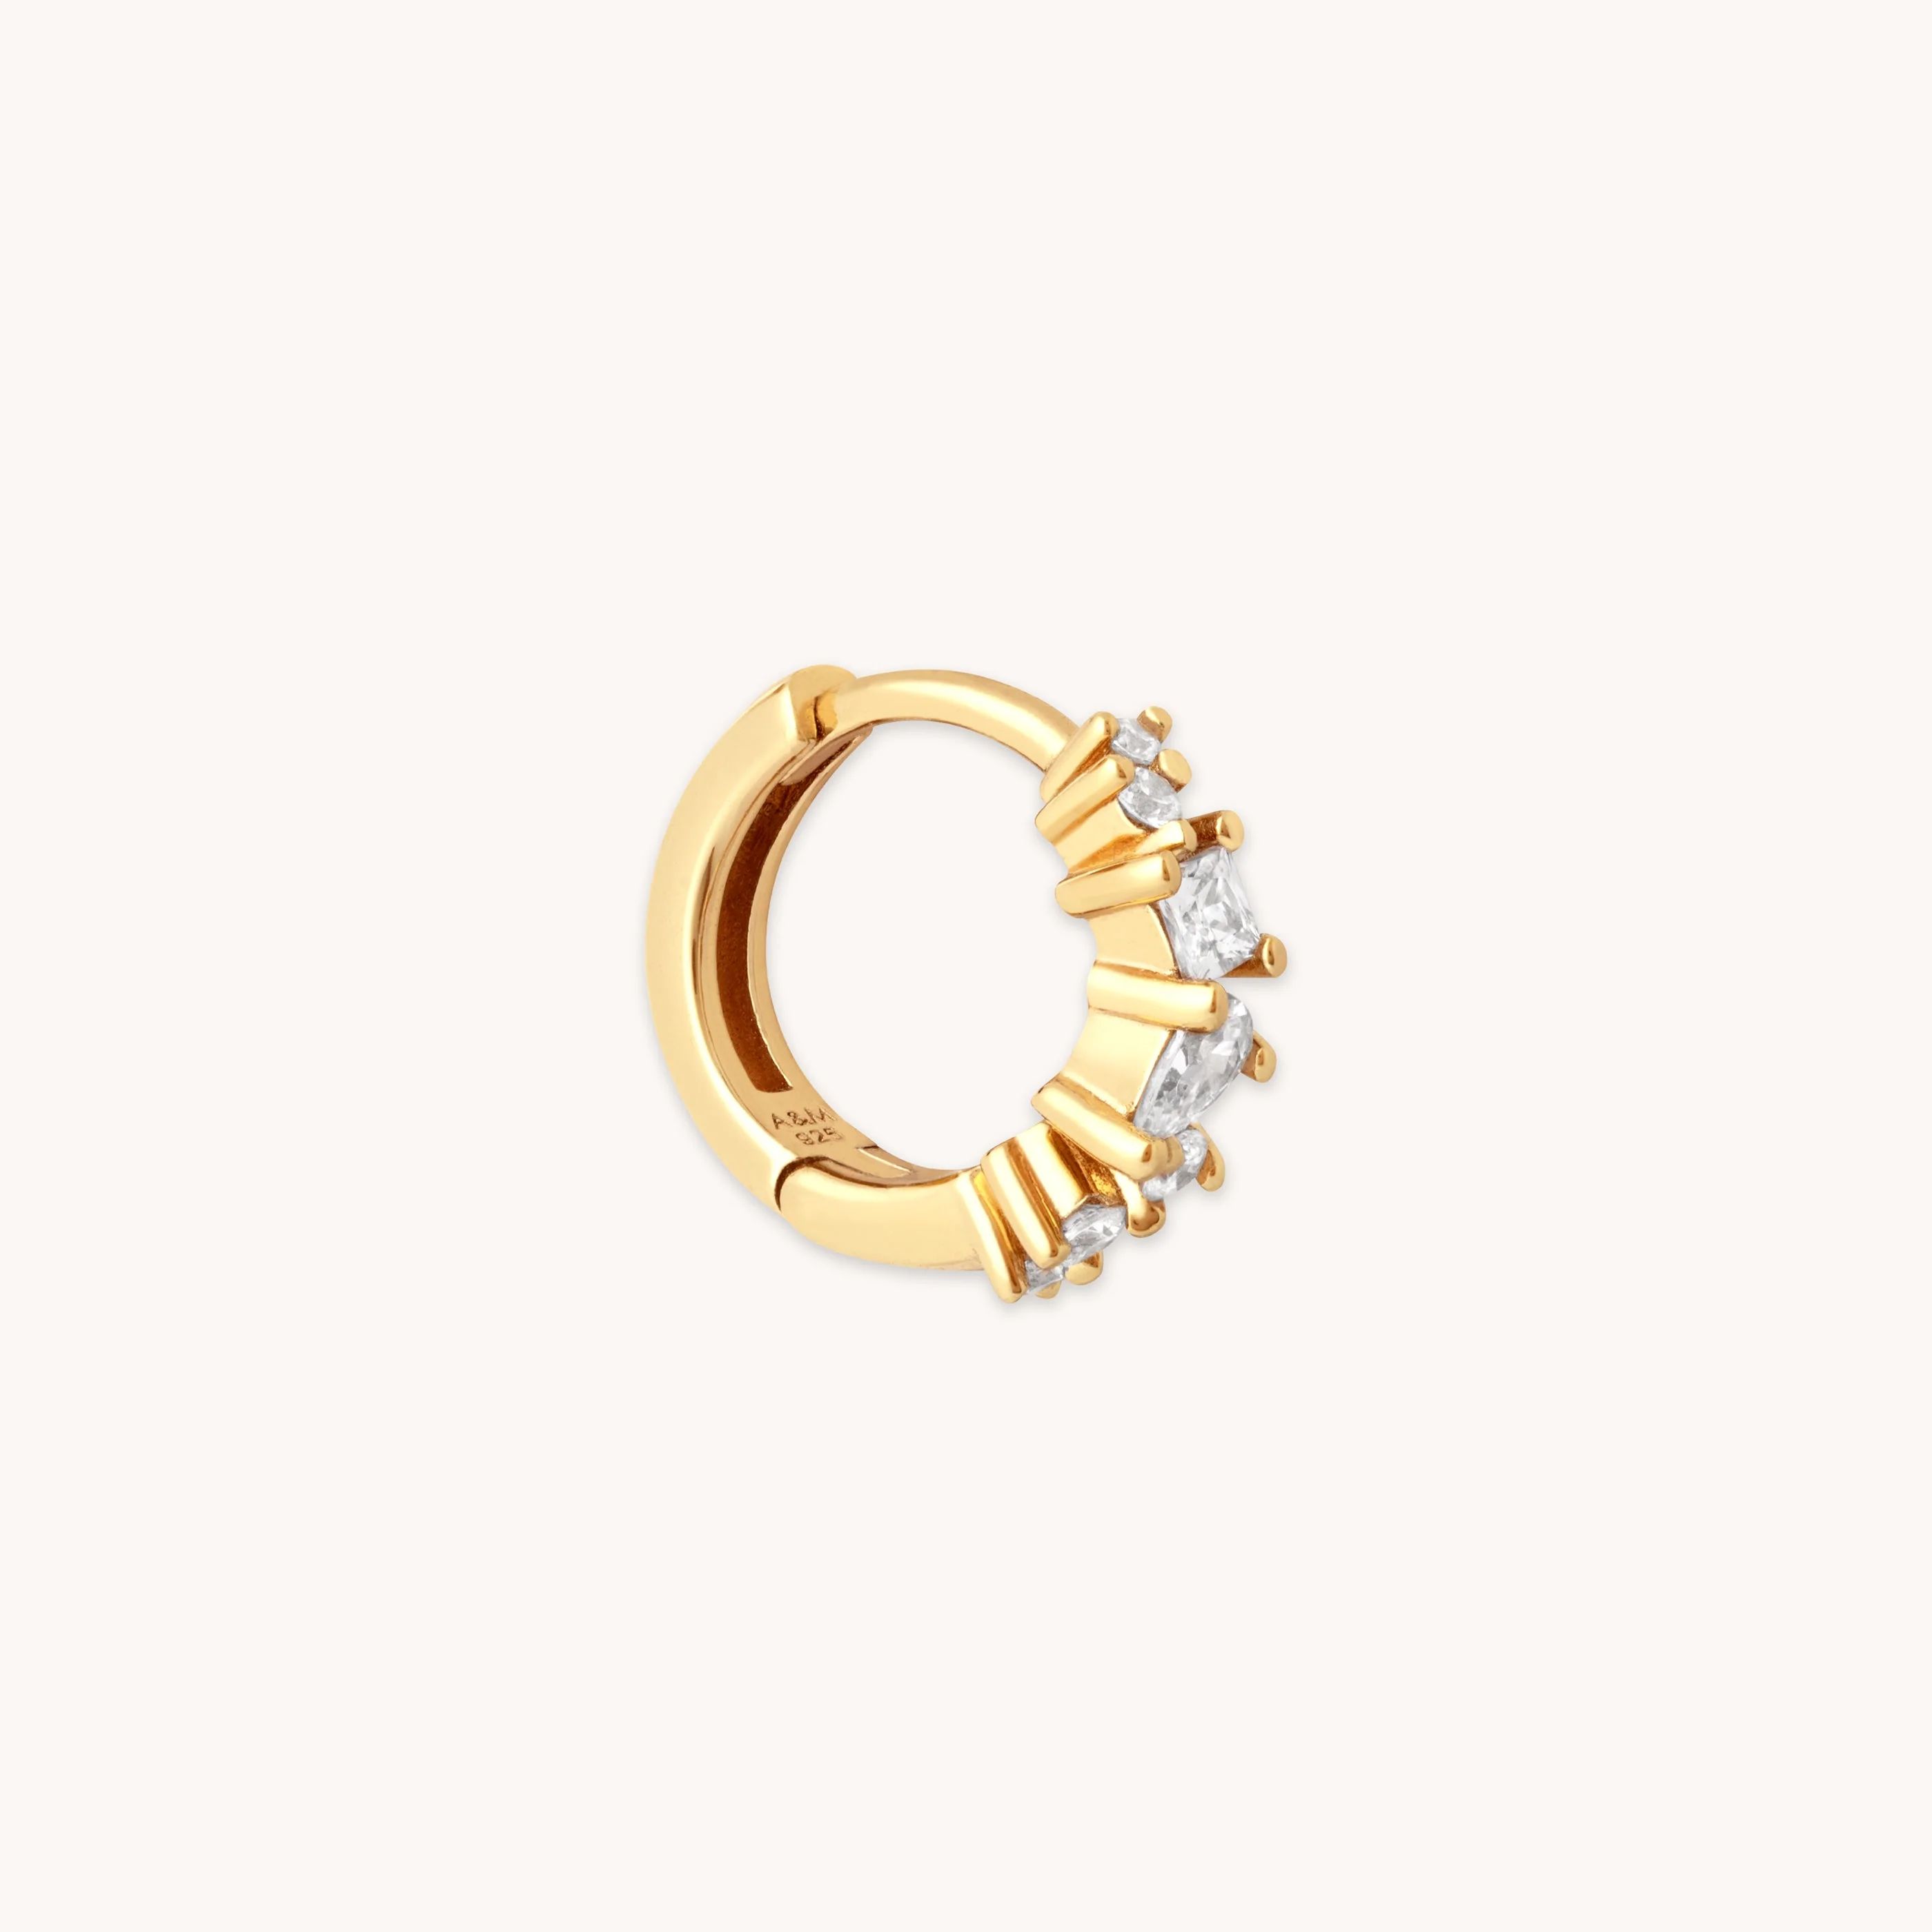 Celestial Crystal 8mm Hoop in Gold | Astrid and Miyu